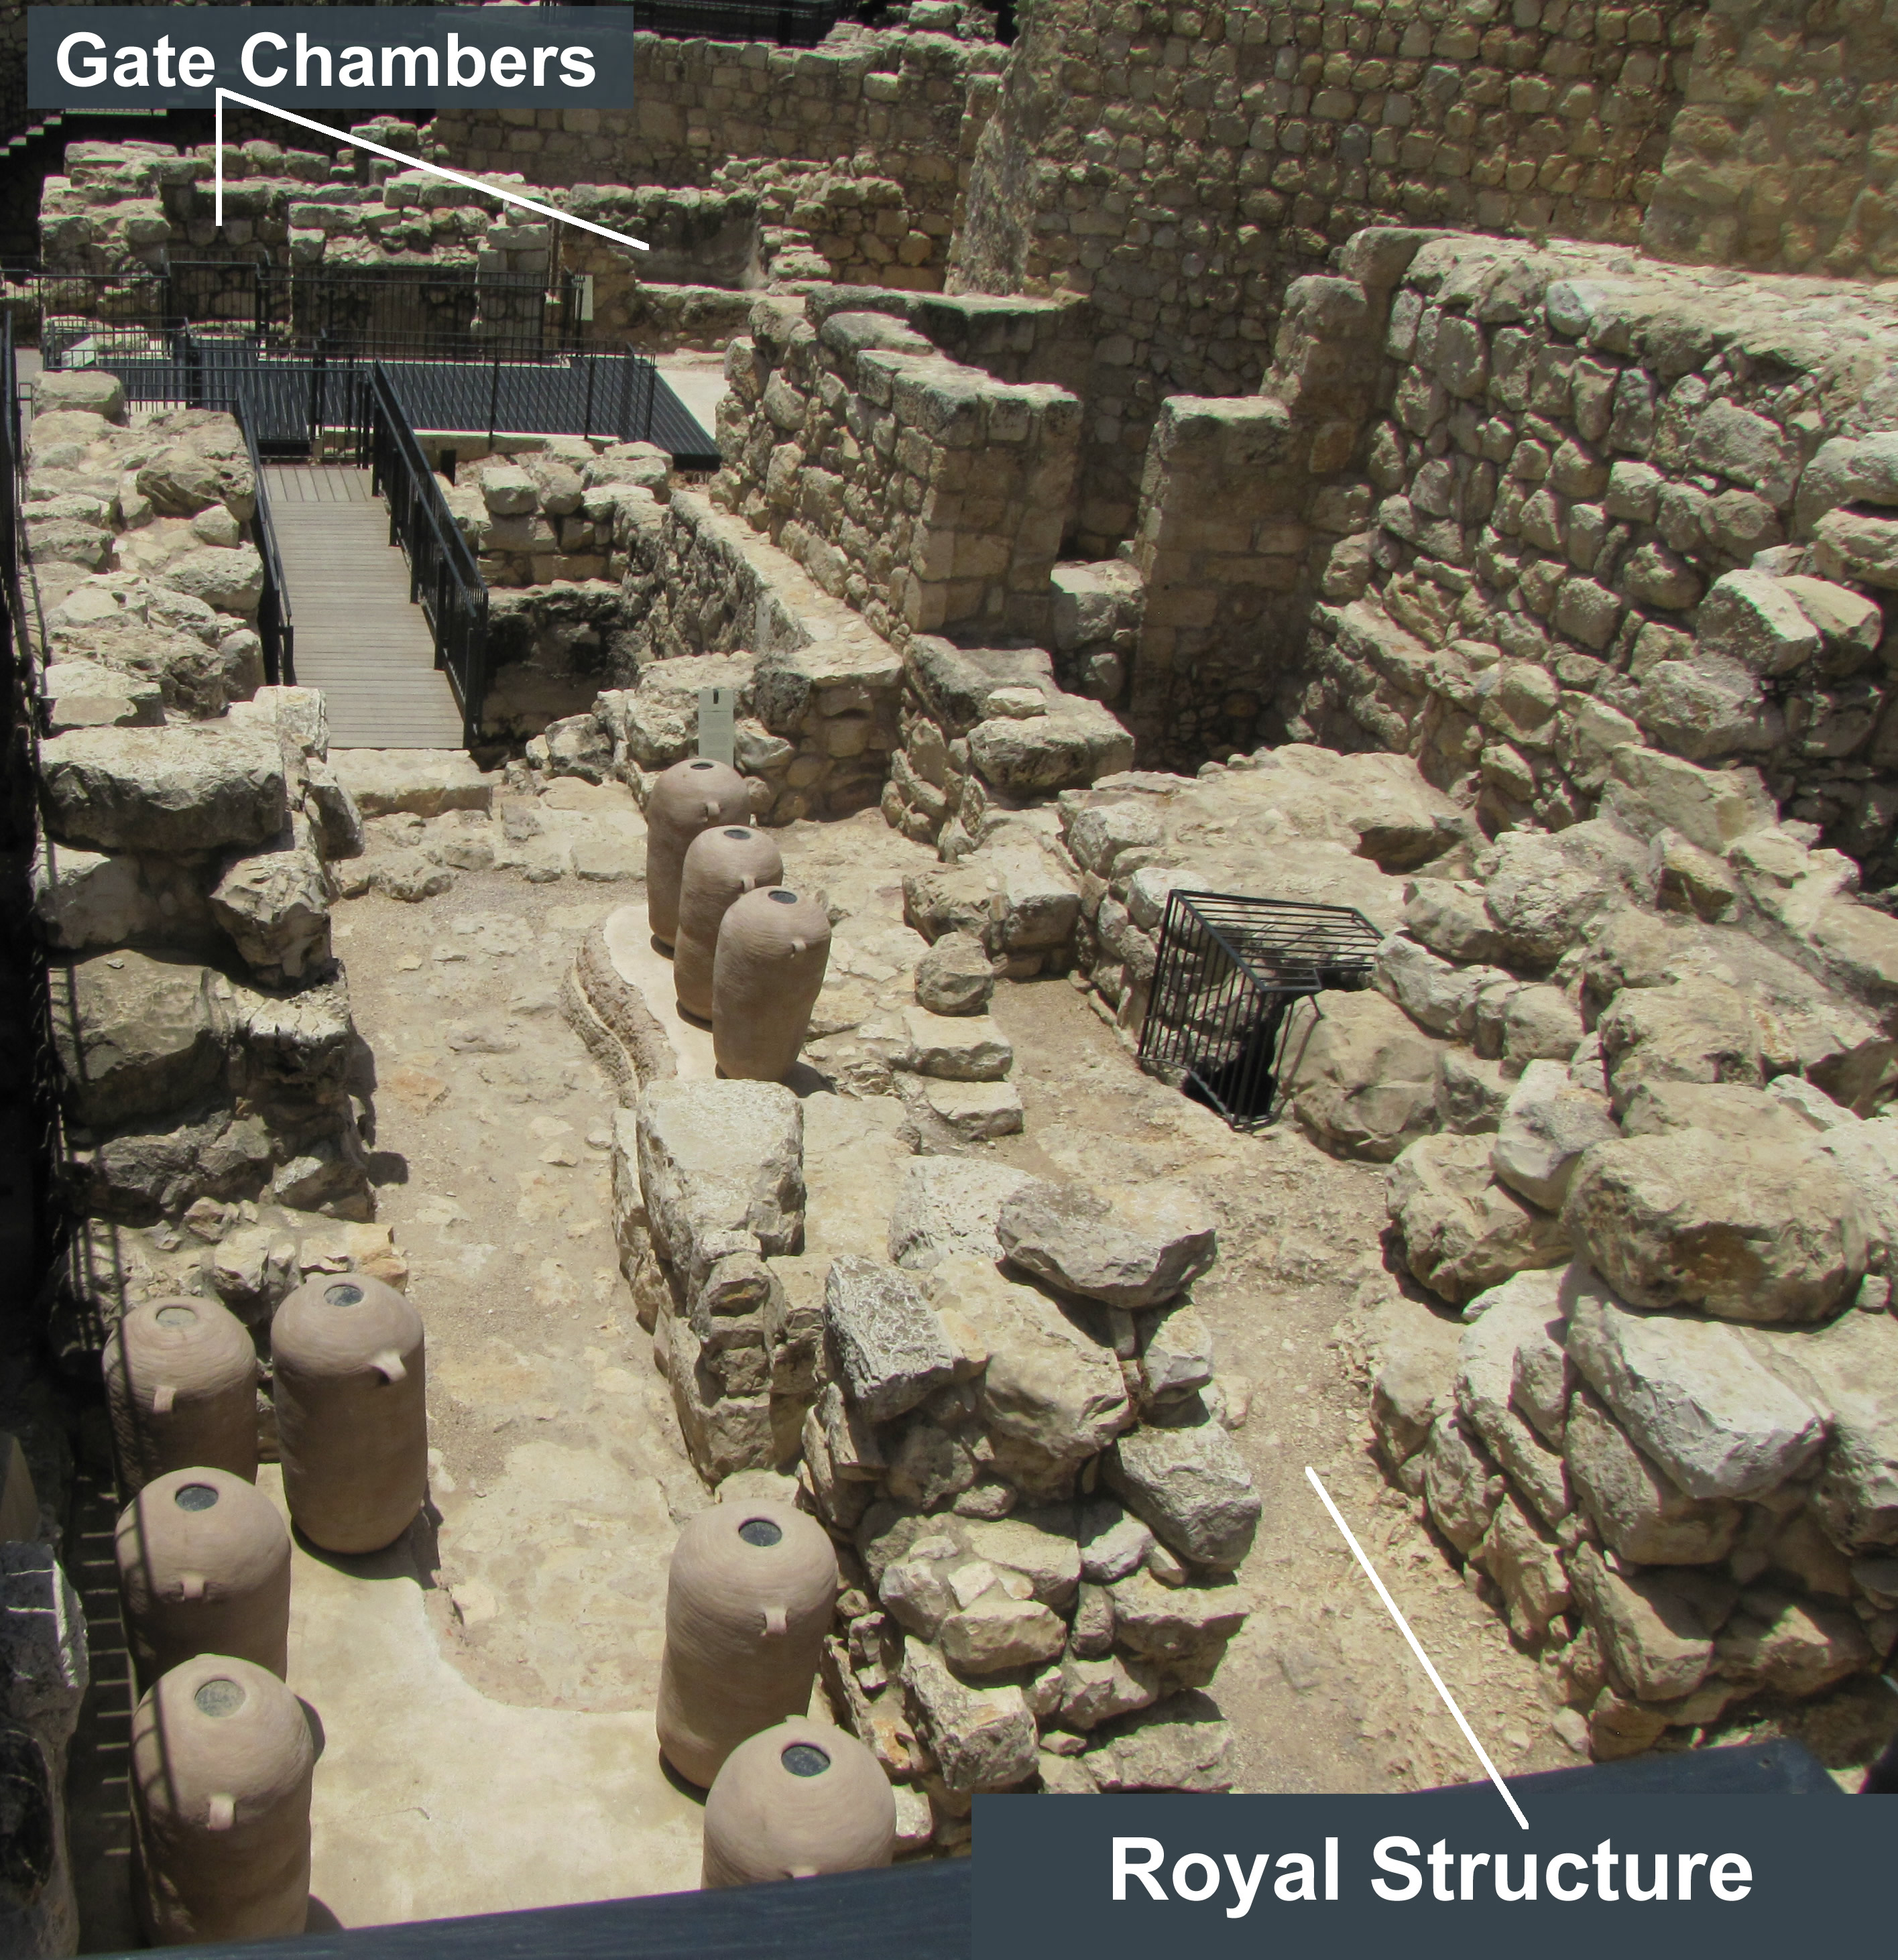 Gate Chambers, Royal Structure, Solomon's Gate, North Wall of Solomon's Jerusalem, 950 BC